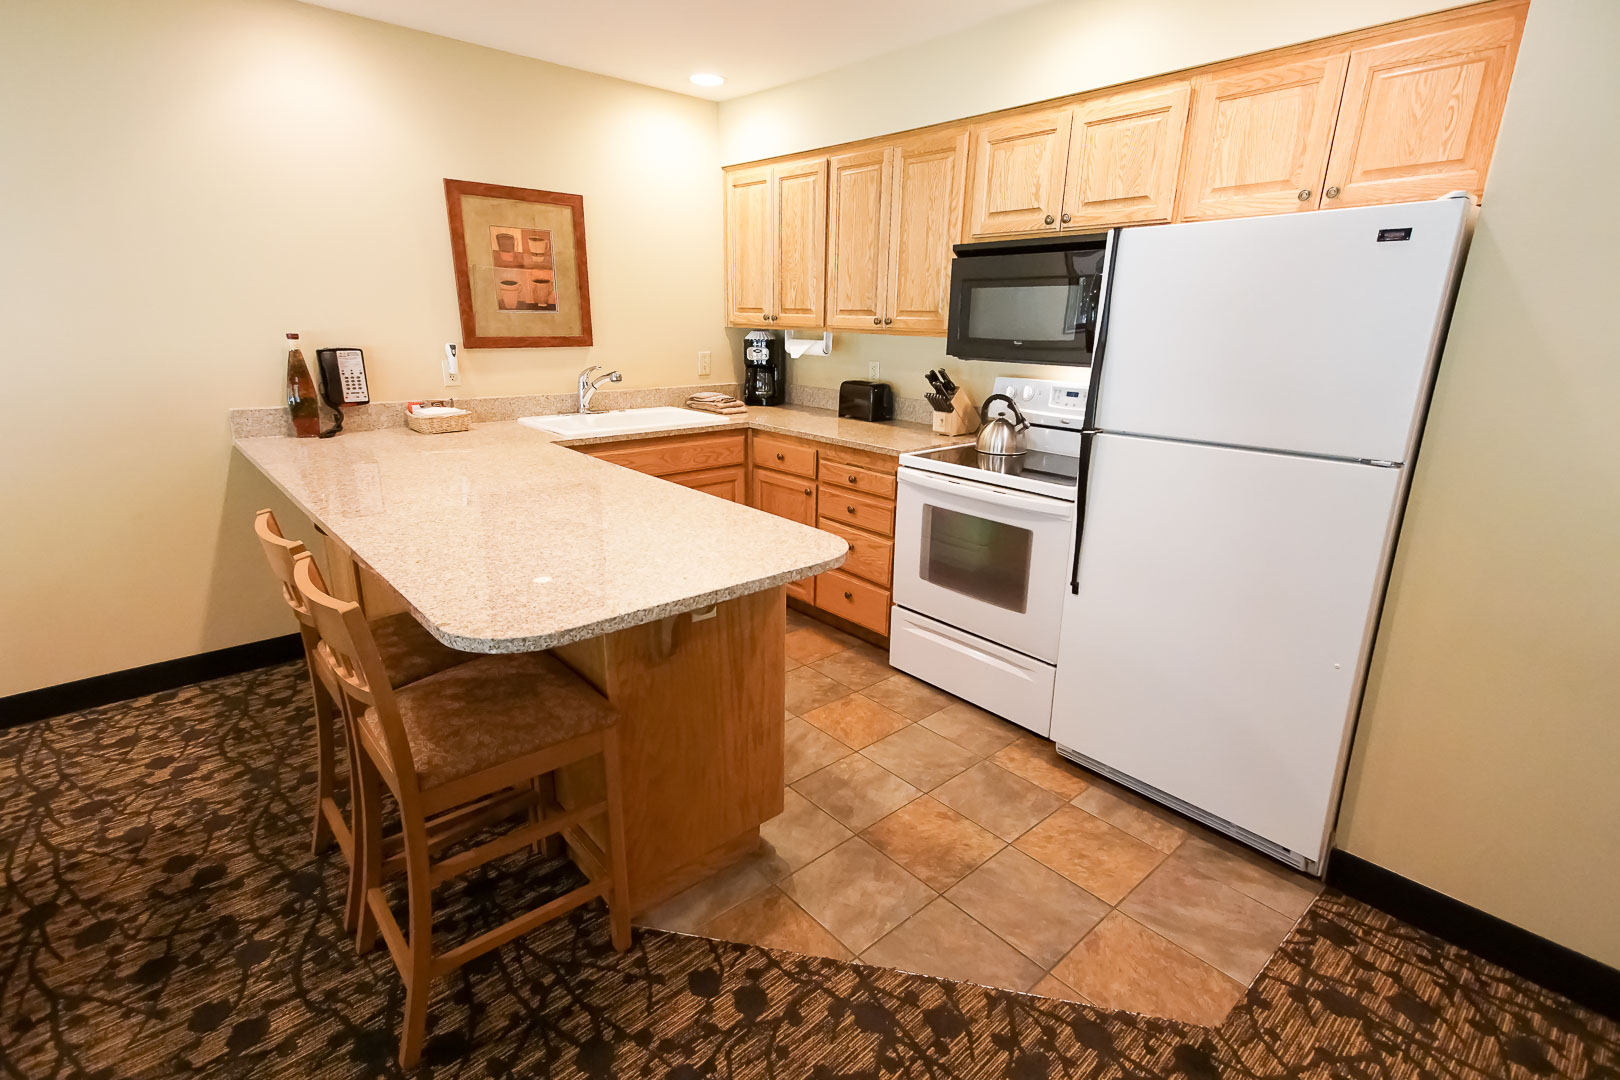 A clean kitchen area at VRI's Whispering Woods Resort in Oregon.